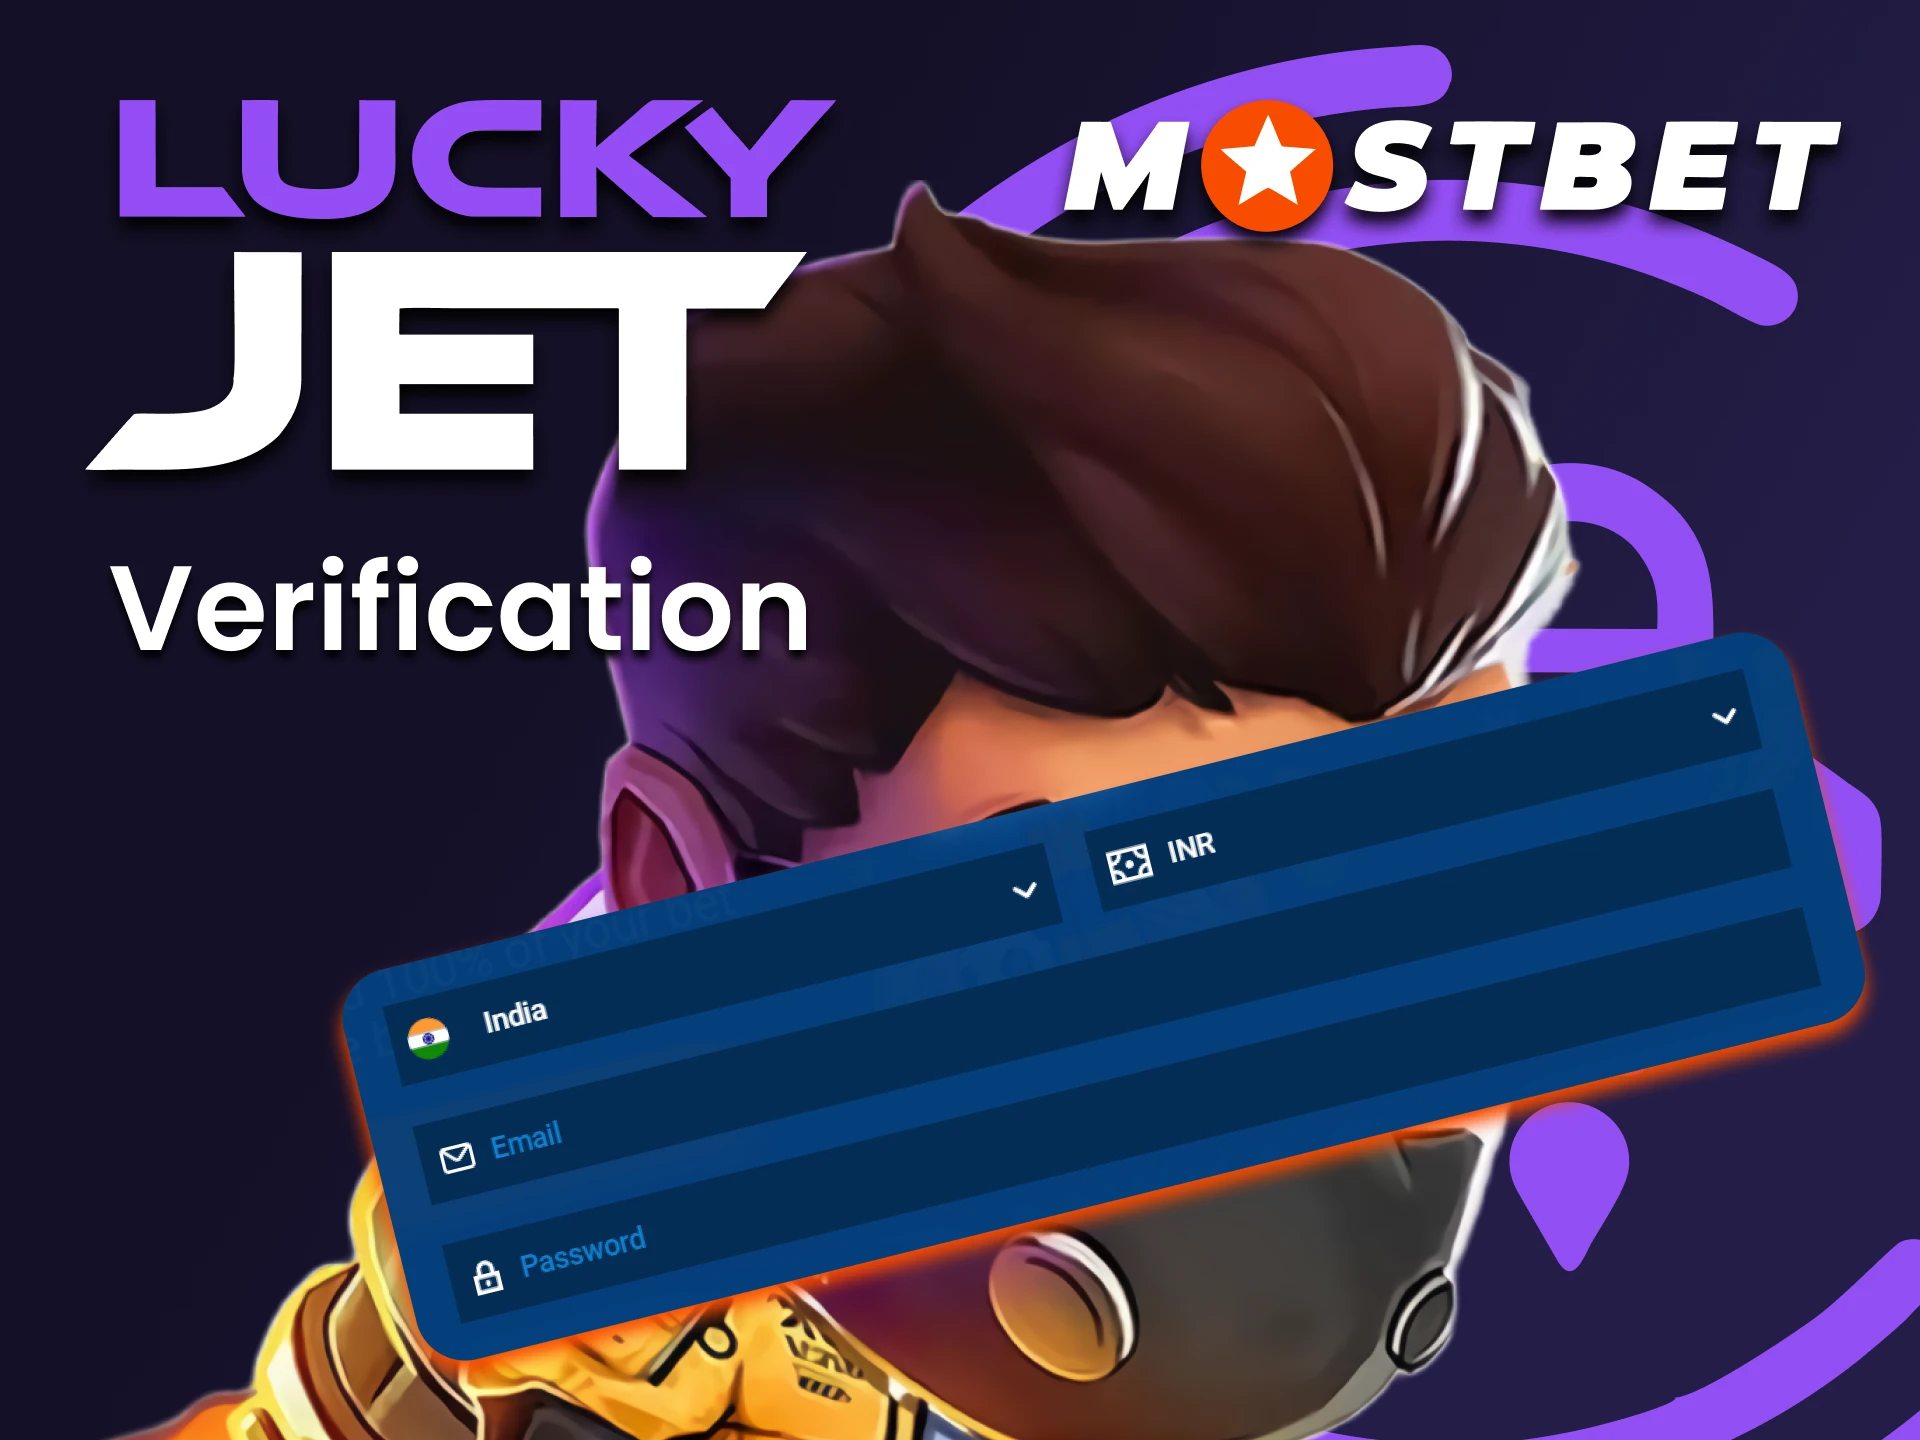 To win real money in Lucky Jet, you need to play them on Mostbet.